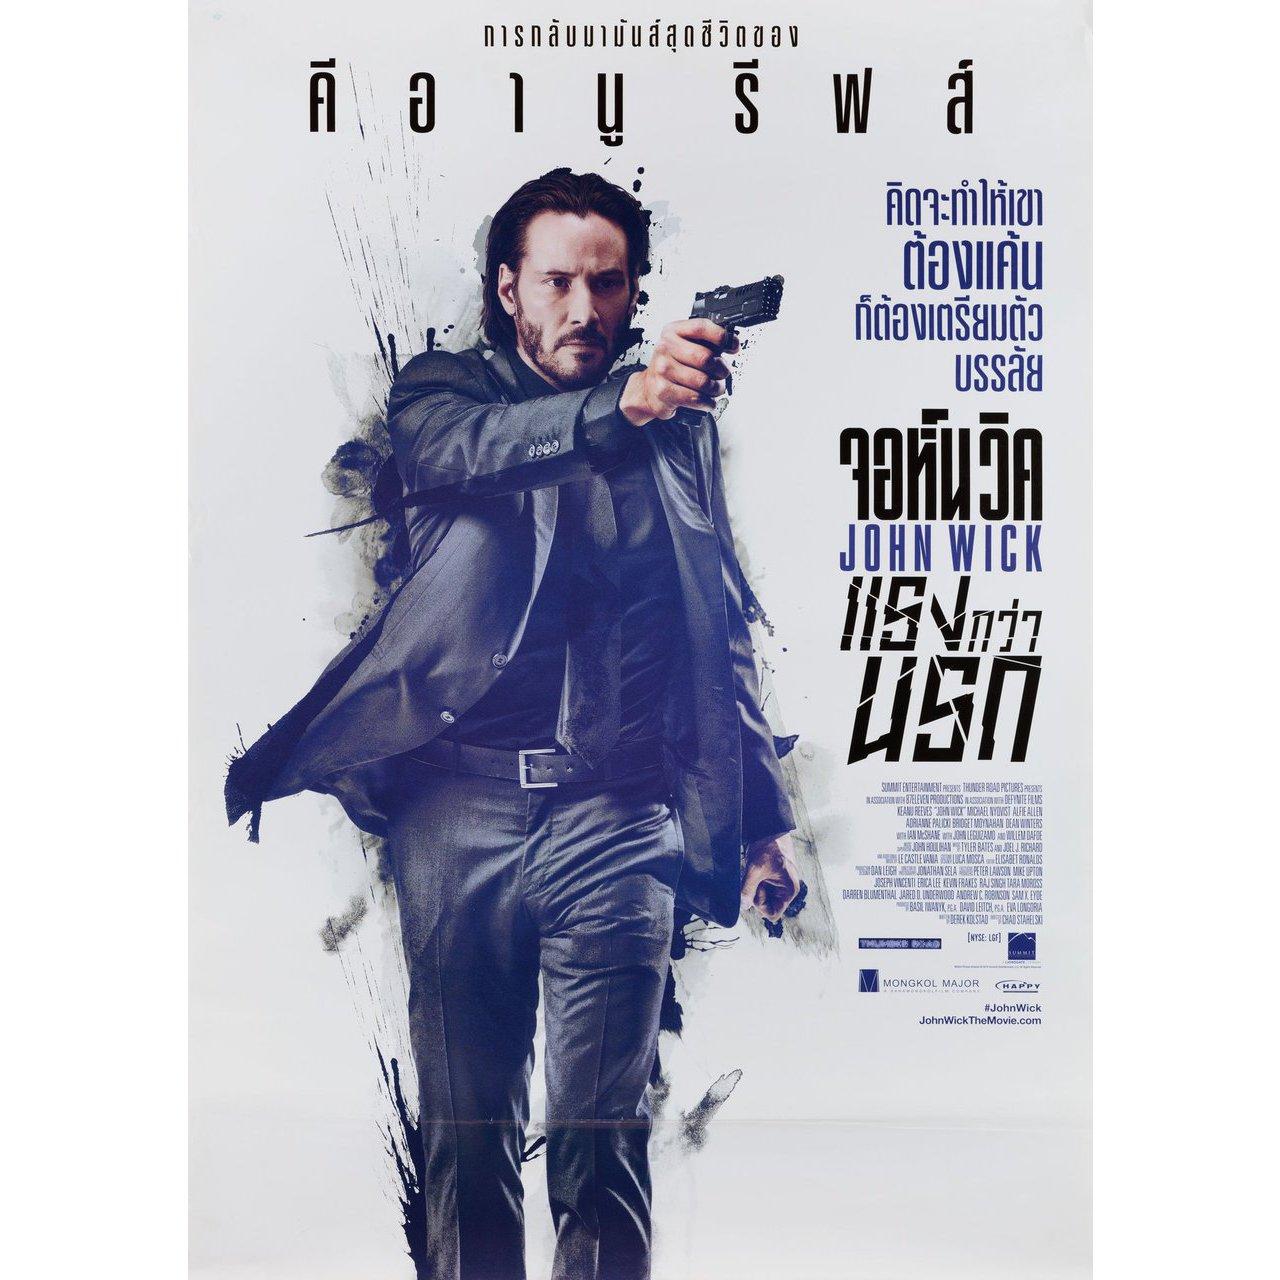 Original 2014 Thai B2 poster for the film John Wick directed by Chad Stahelski / David Leitch with Keanu Reeves / Michael Nyqvist / Alfie Allen. Very Good-Fine condition, rolled. Please note: the size is stated in inches and the actual size can vary